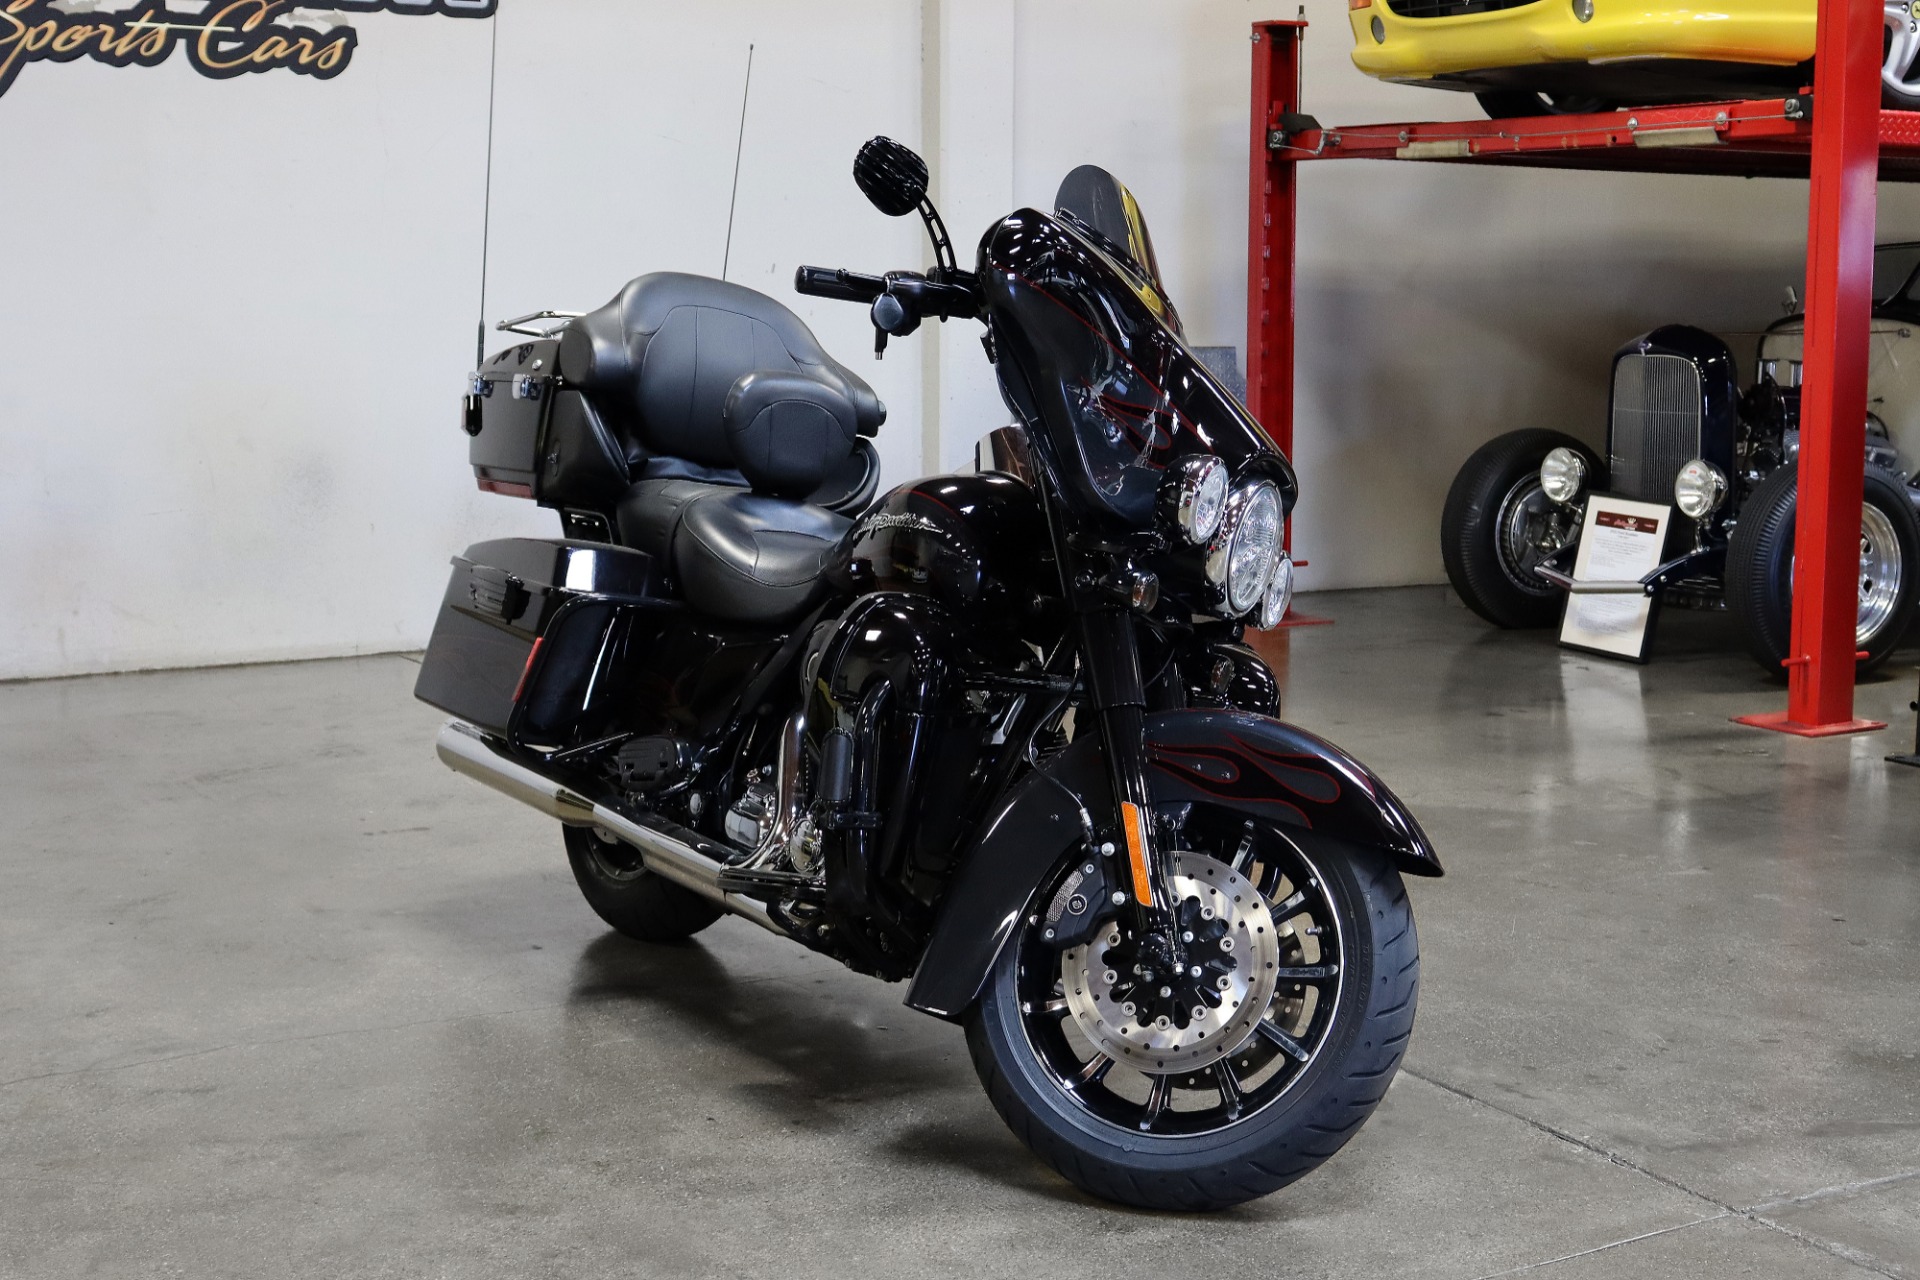 Used 2010 Harley Davidson Electra Glide CVO for sale Sold at San Francisco Sports Cars in San Carlos CA 94070 1